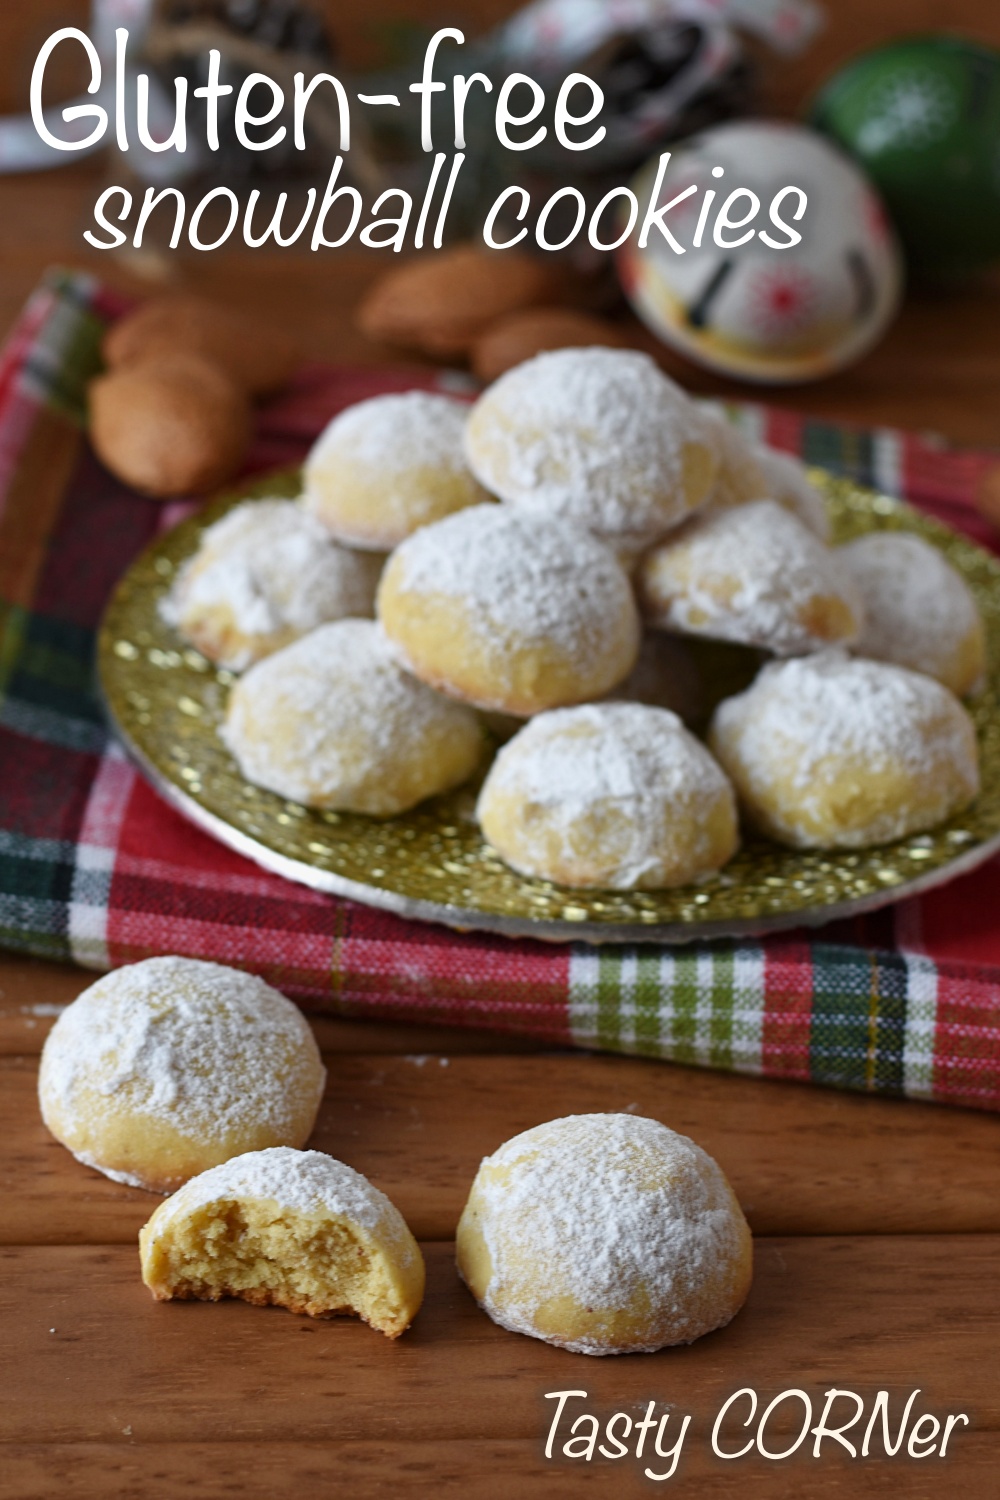 en_v_ gluten-free snowball cookies with almonds easy and quick recipe for xmas cookies by tastycorner